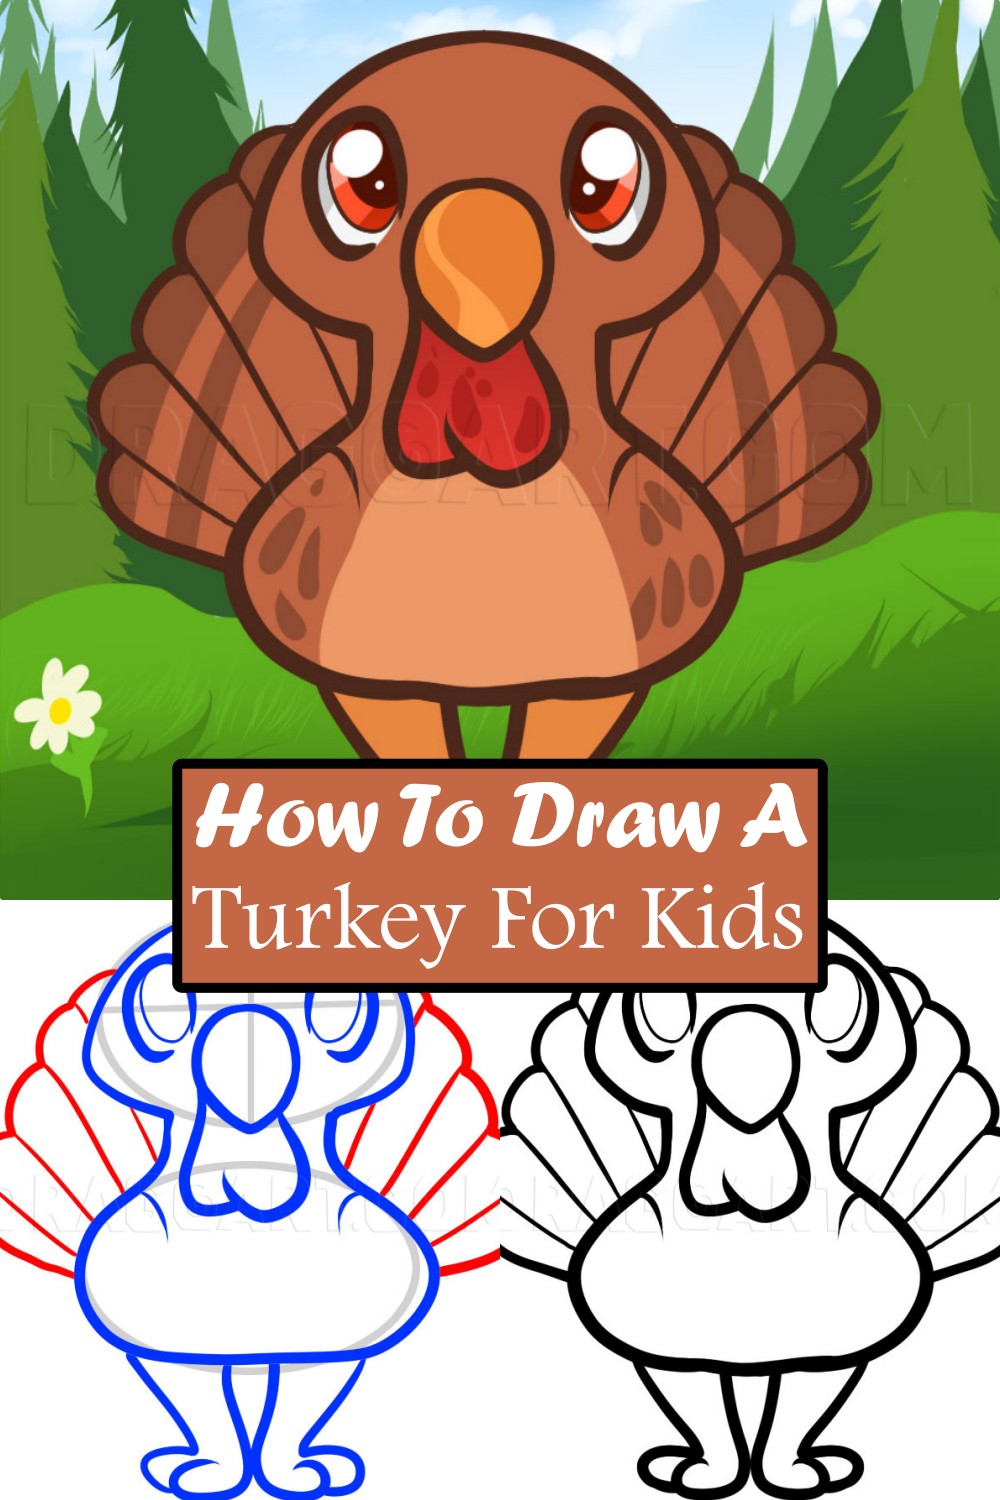 How To Draw A Turkey For Kids